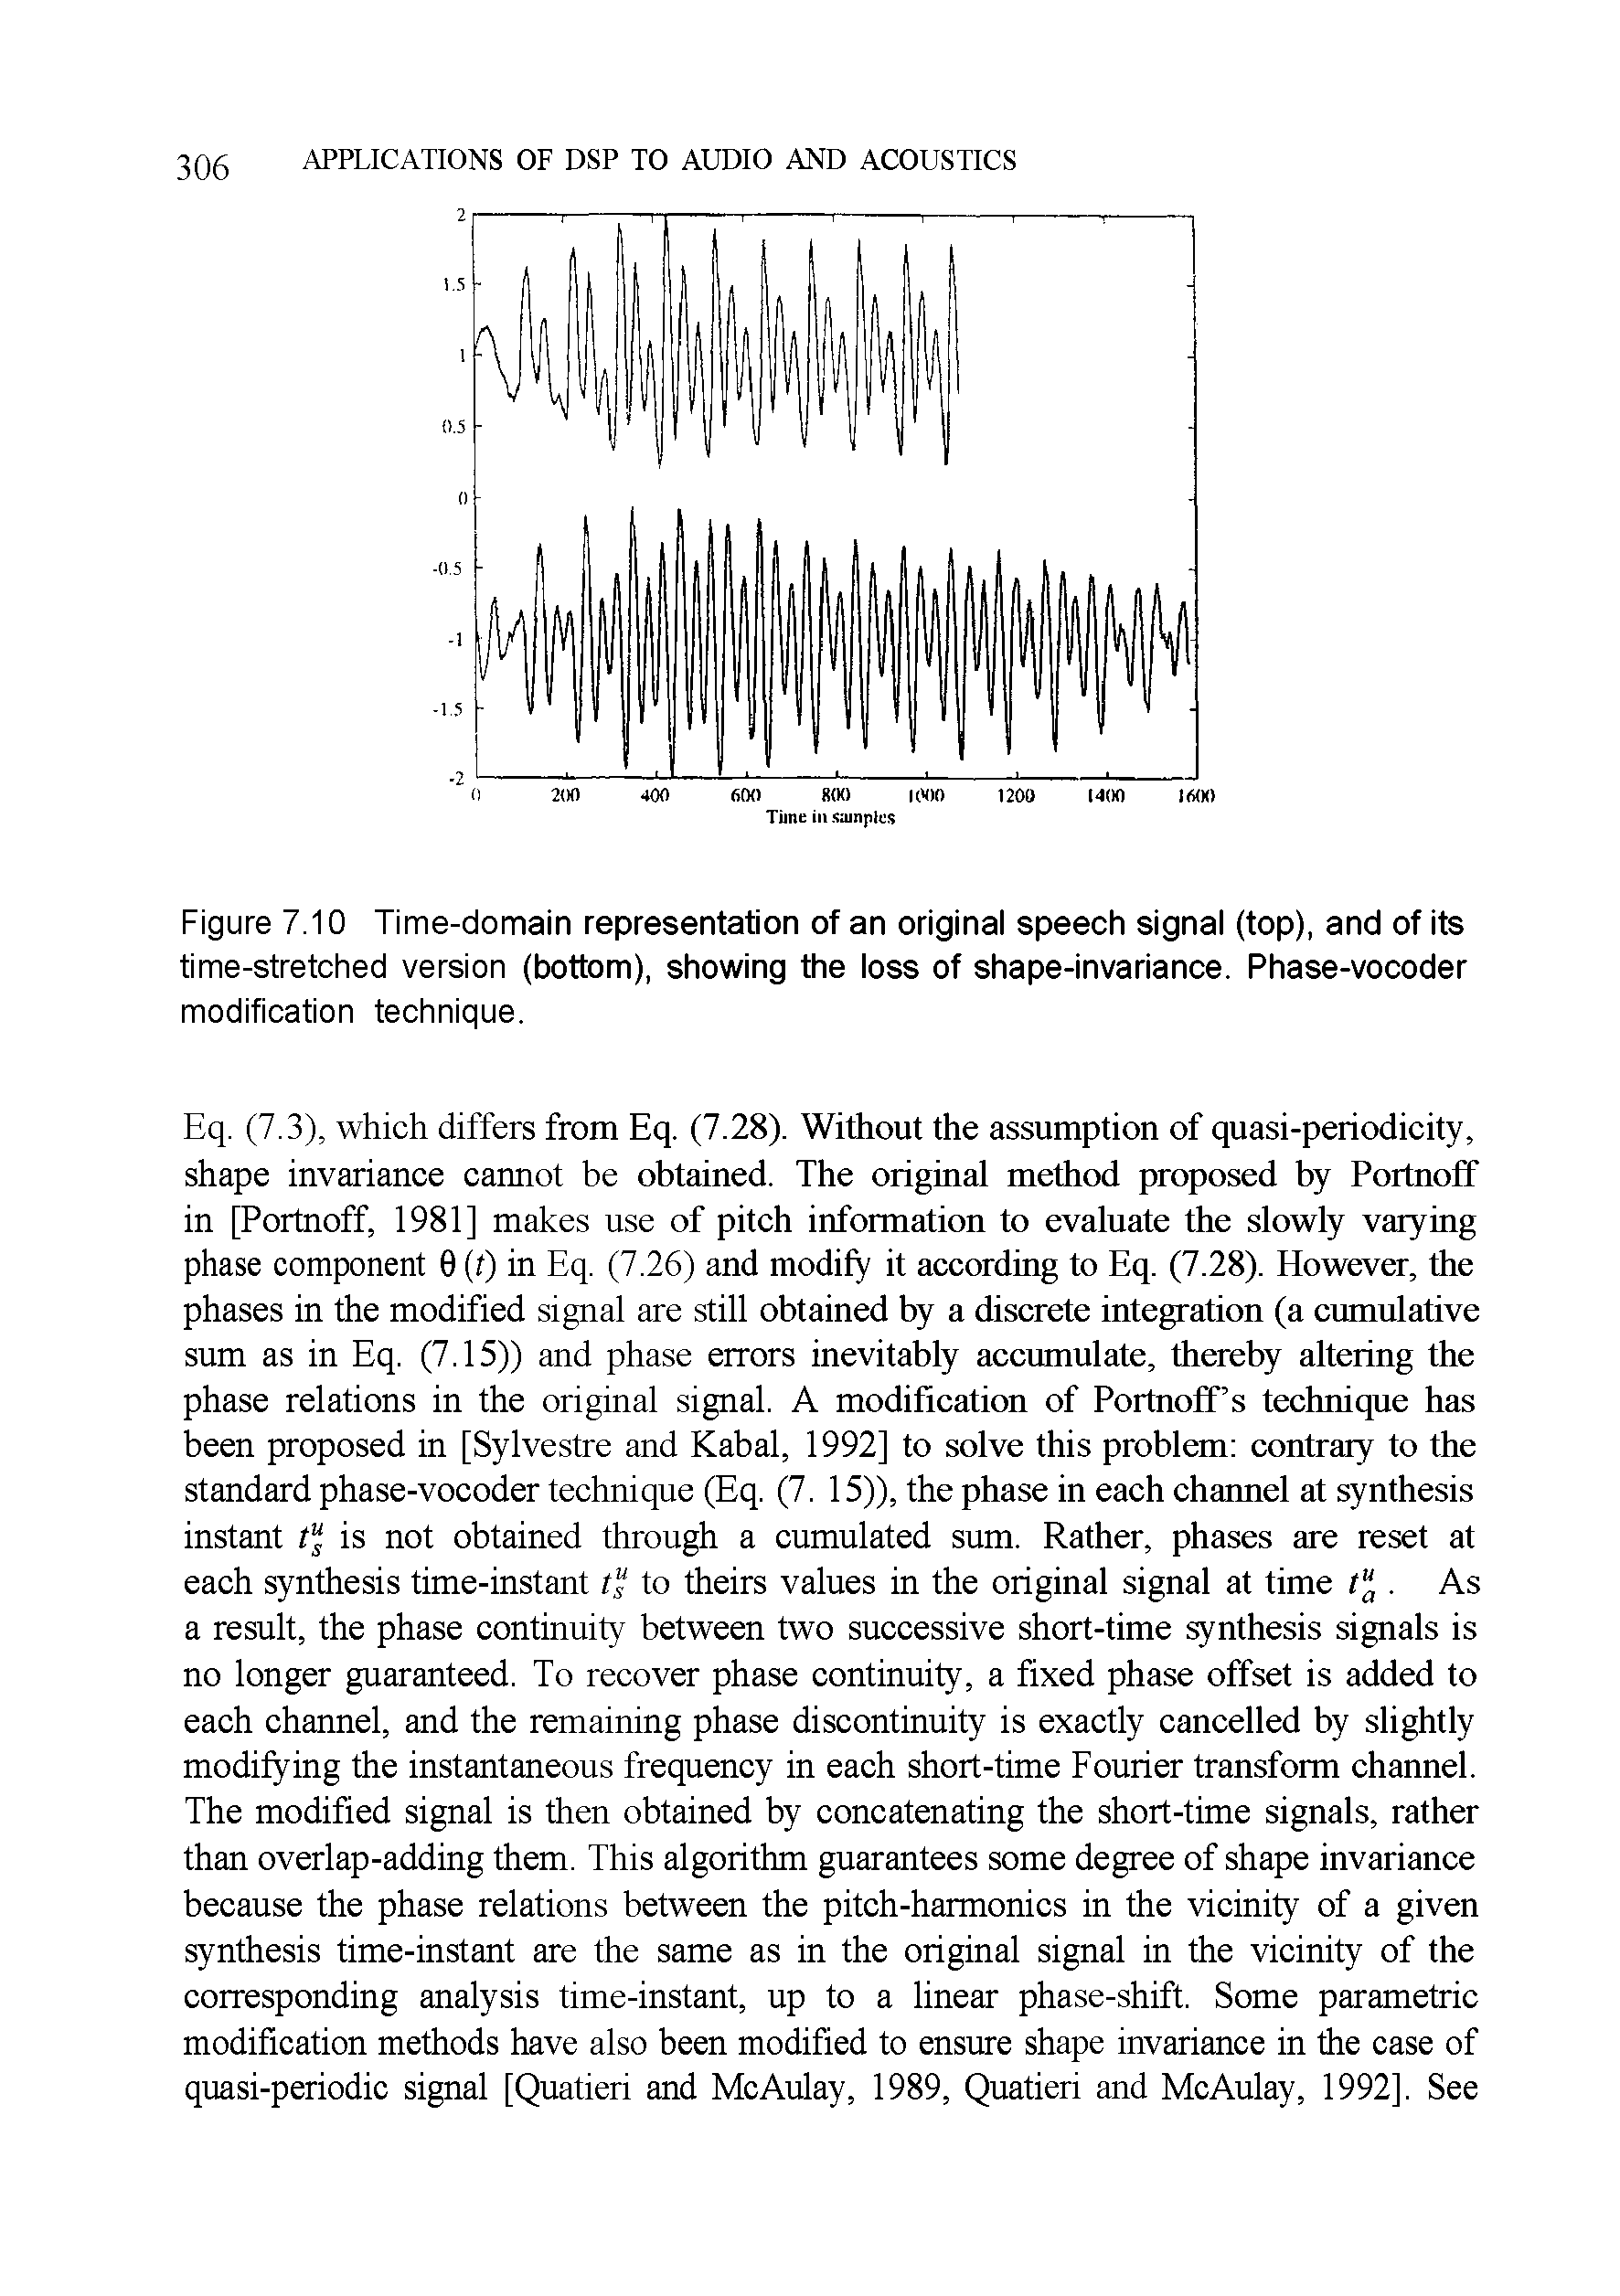 Figure 7.10 Time-domain representation of an original speech signal (top), and of its time-stretched version (bottom), showing the loss of shape-invariance. Phase-vocoder...